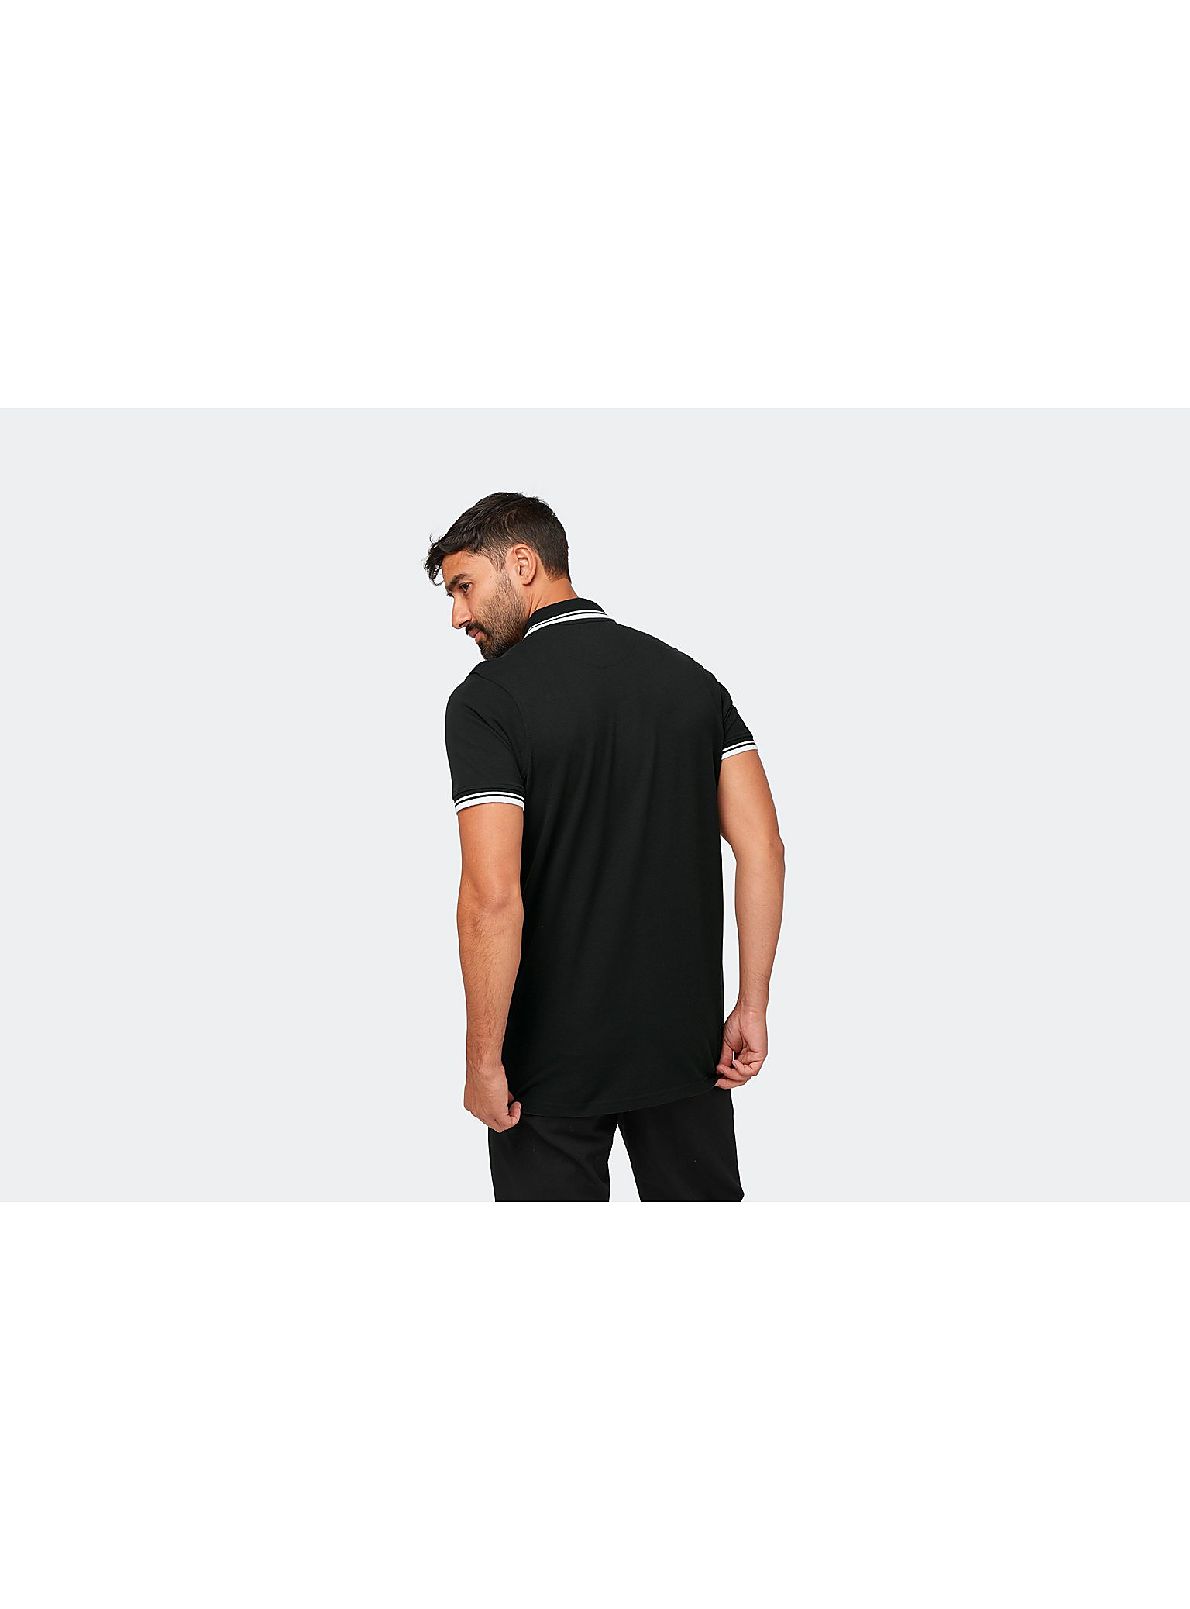 Arsenal Cannon 1886 Black Polo Shirt | Official Online Store